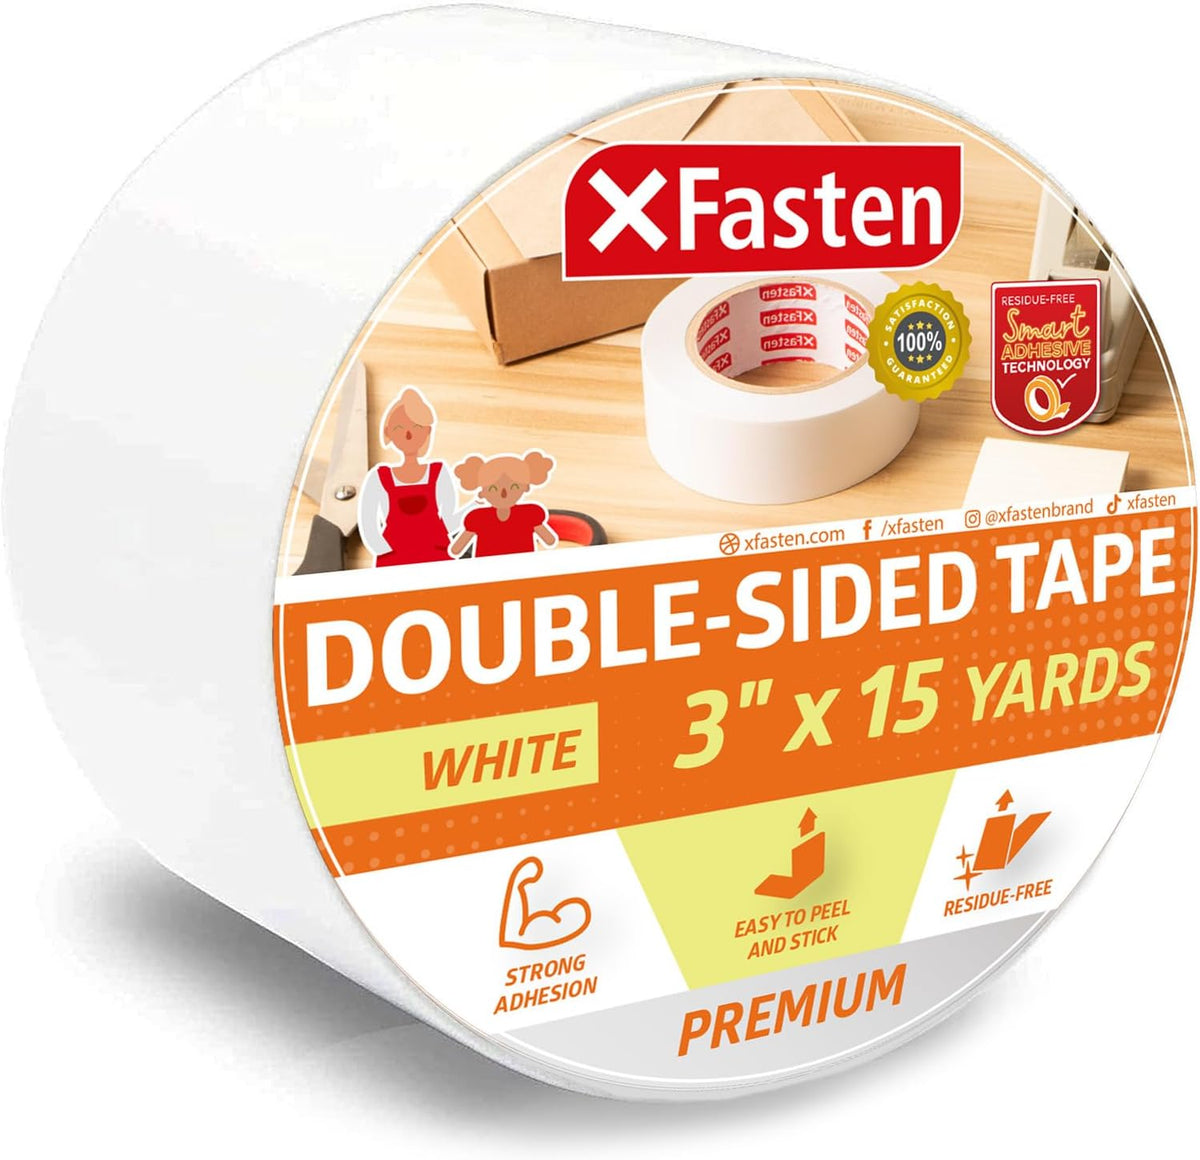 XFasten Double Sided Woodworking Tape, 1 Inch x 20 Yards